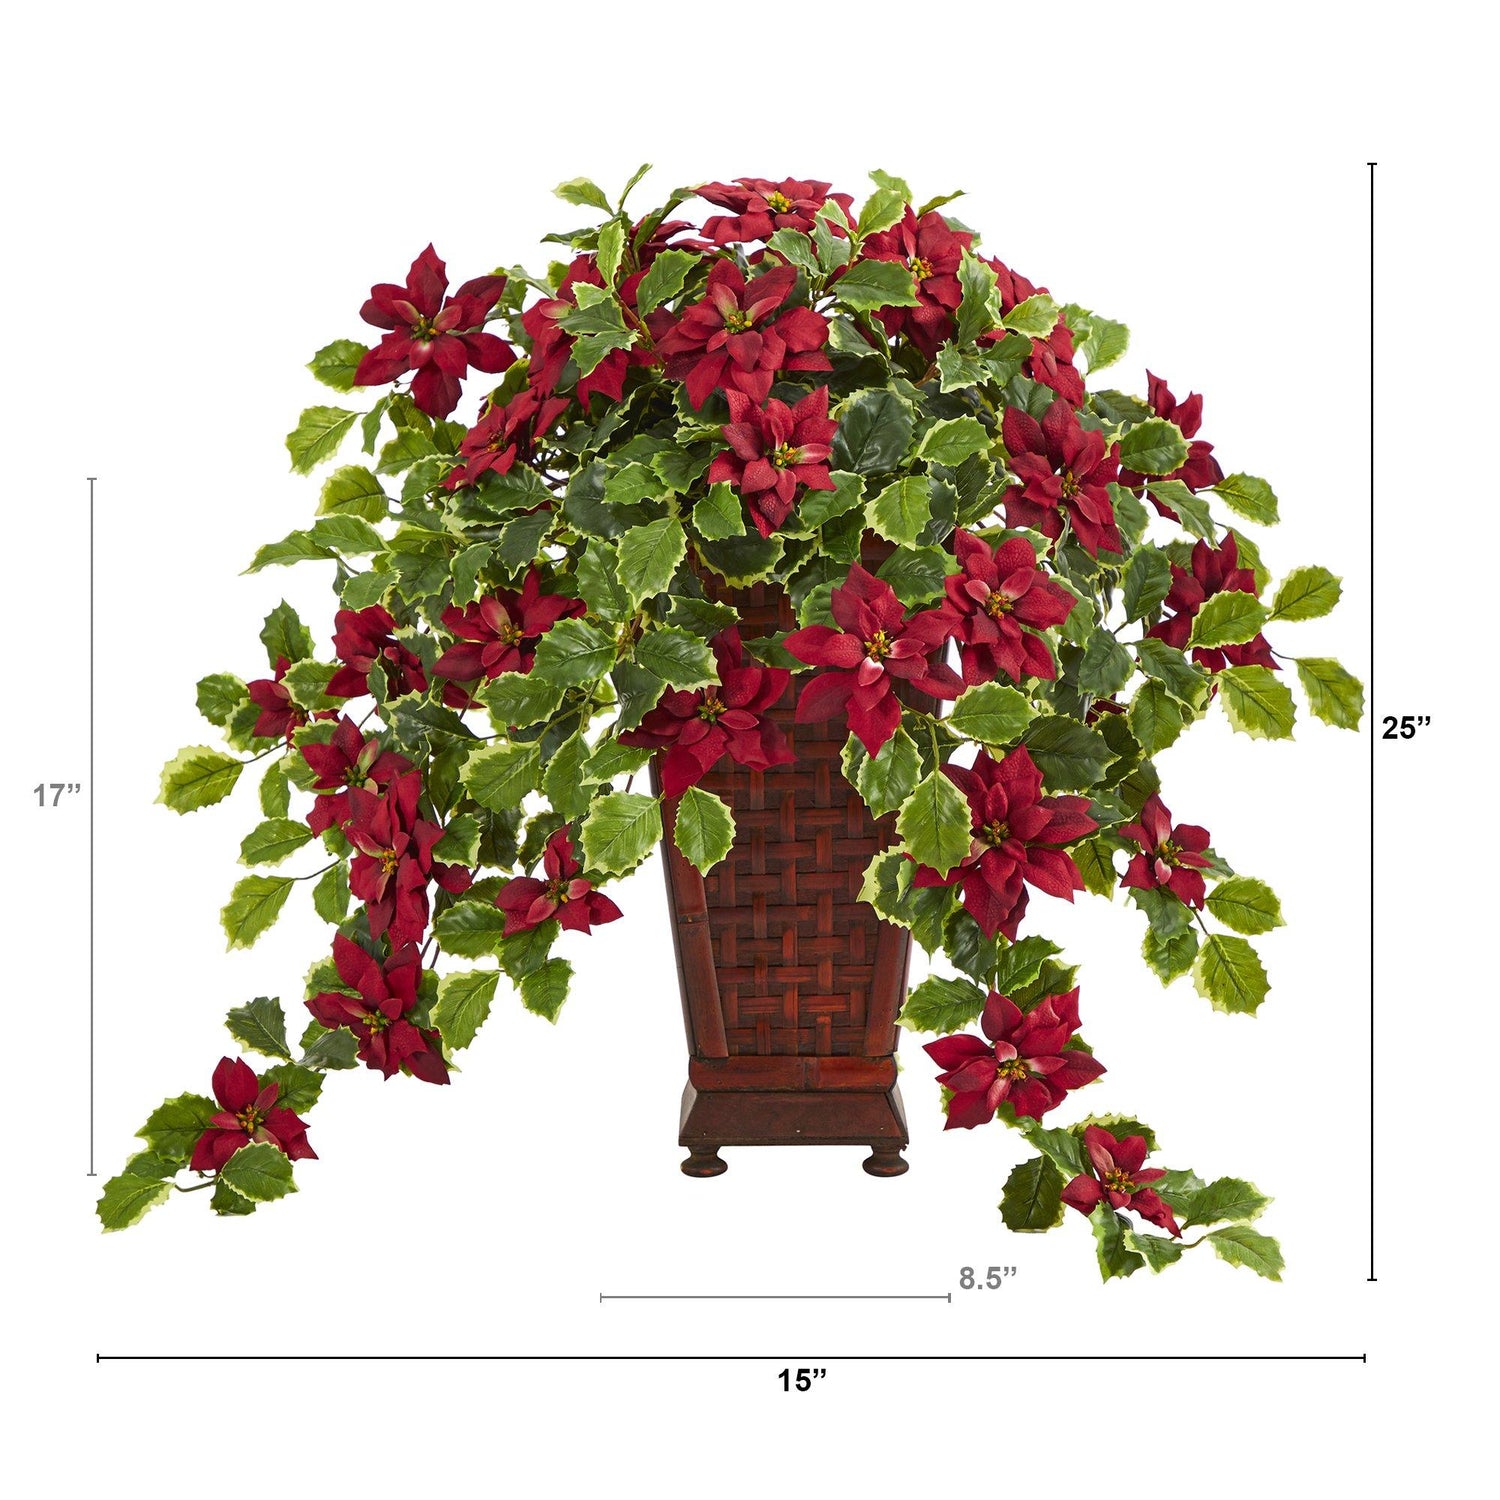 25” Poinsettia and Variegated Holly Artificial Plant in Planter (Real Touch)